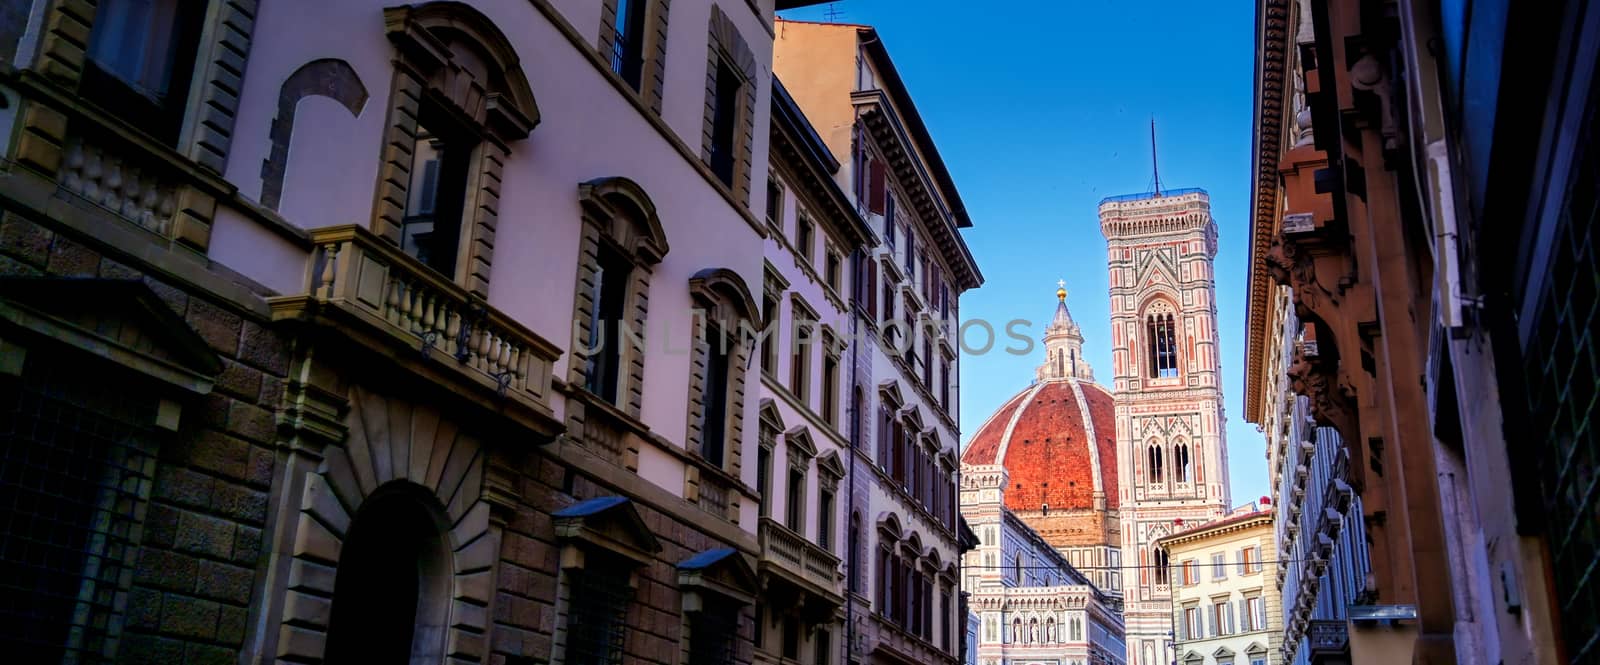 Florence Cathedral in Florence, Italy by jbyard22